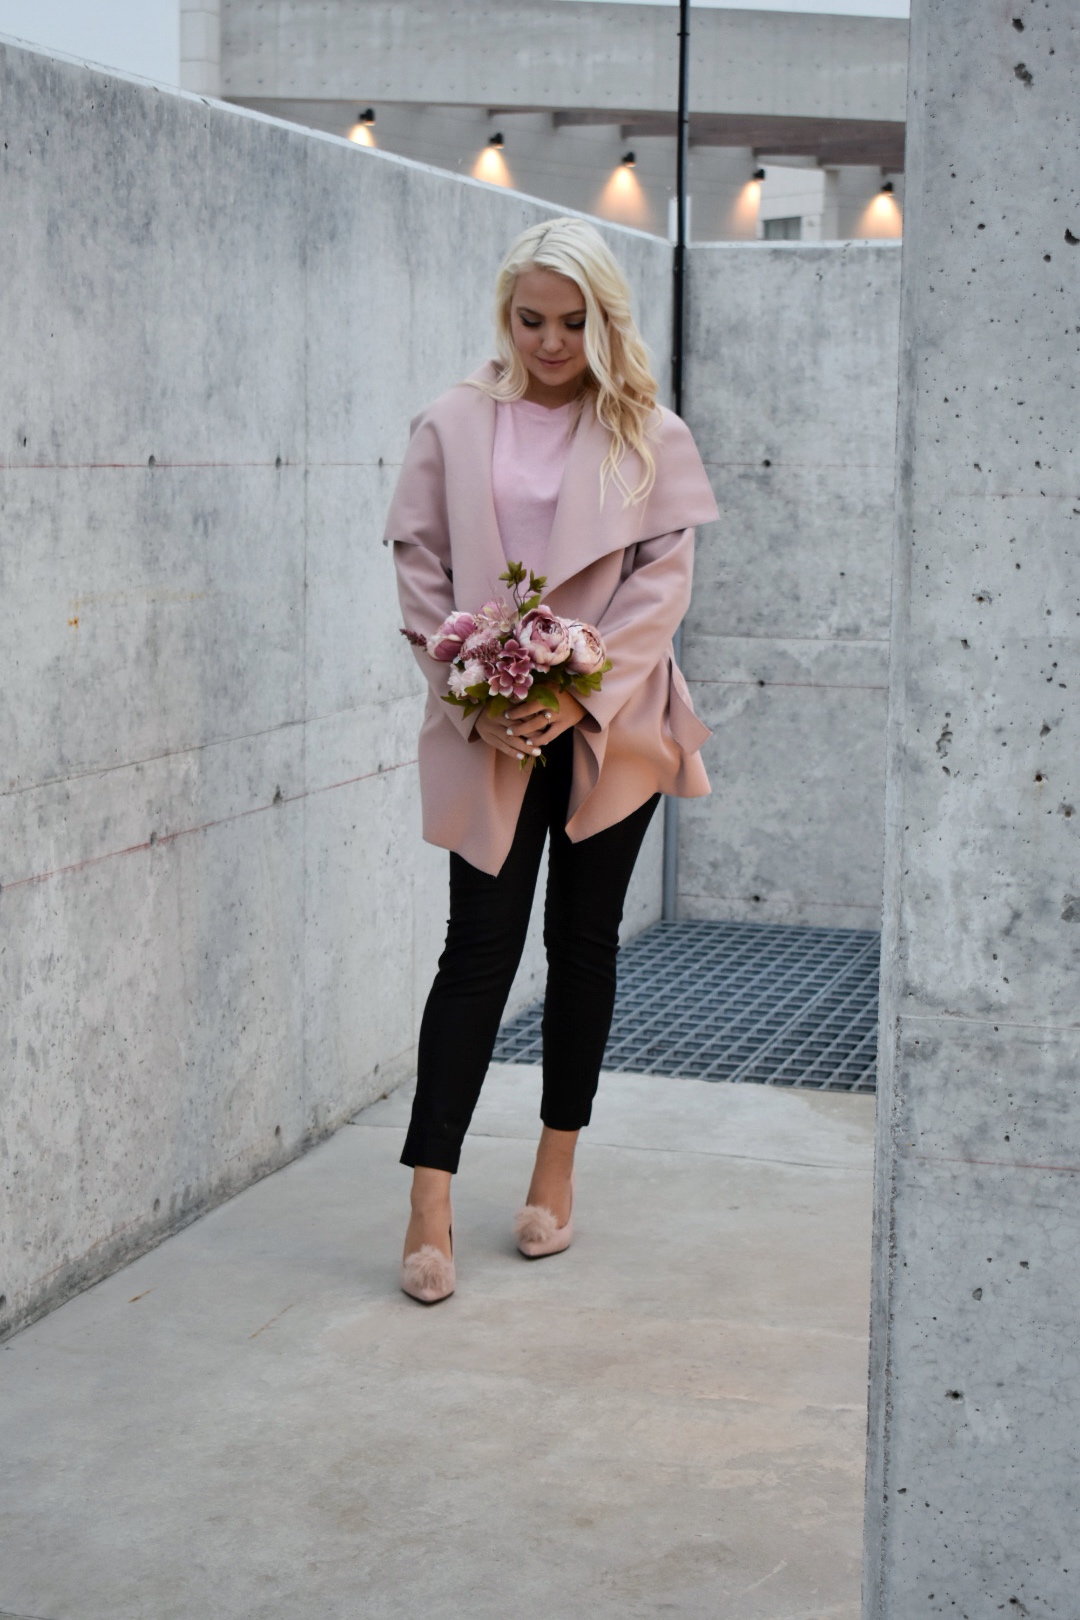 A Romantic Valentines Date Outfit – Pretty Lovely in Pink